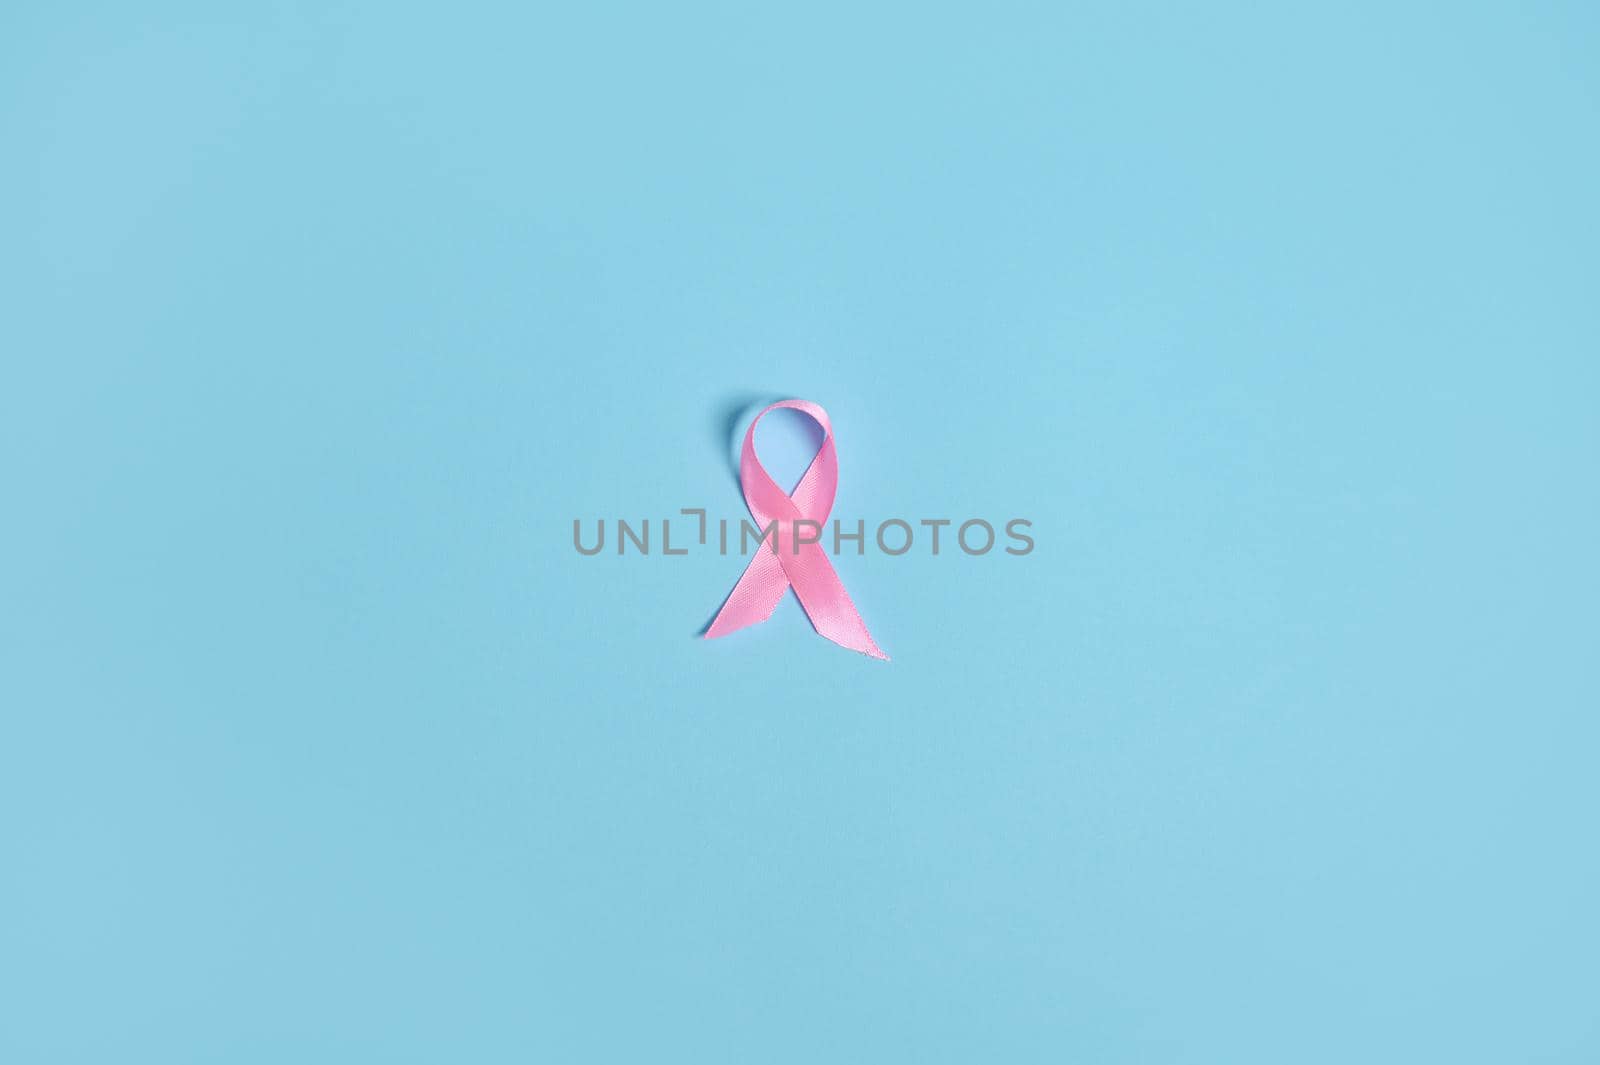 Flat lay of a satin pink ribbon awareness, International symbol of Breast Cancer Awareness Month in October. Isolated over on blue background with copy space . Medical and Women's health care concept. by artgf